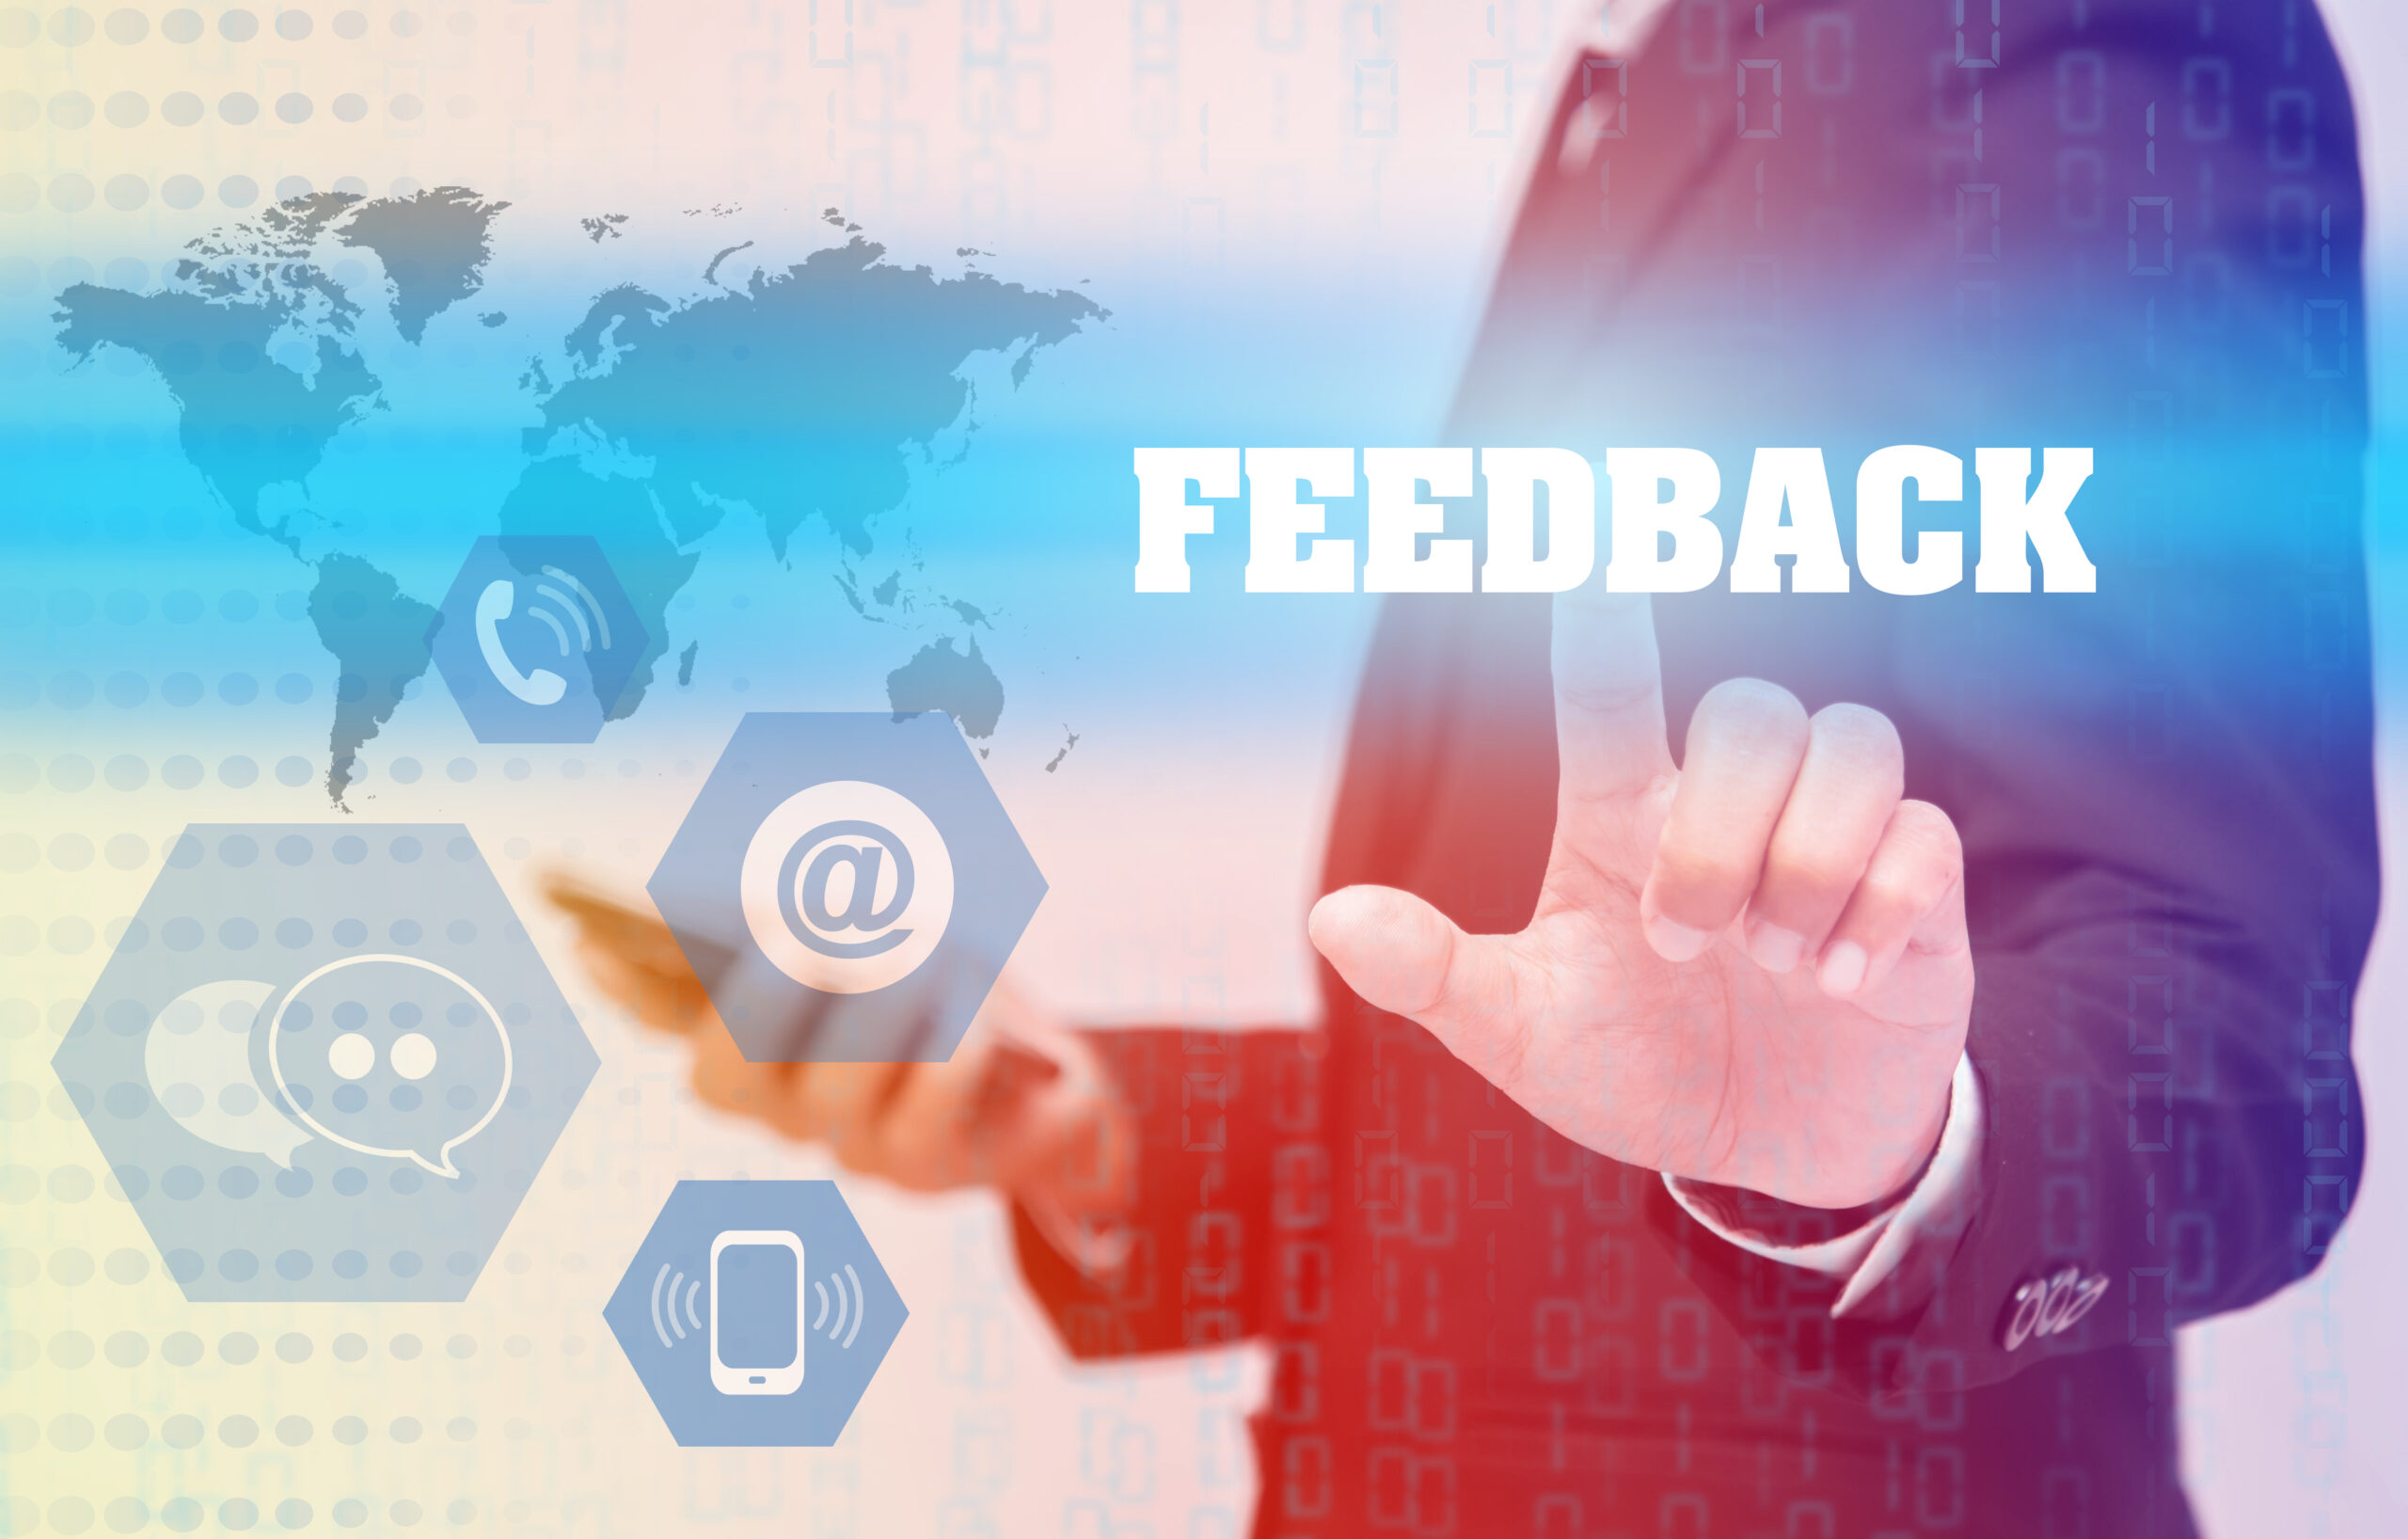 lean into feedback to advance your career